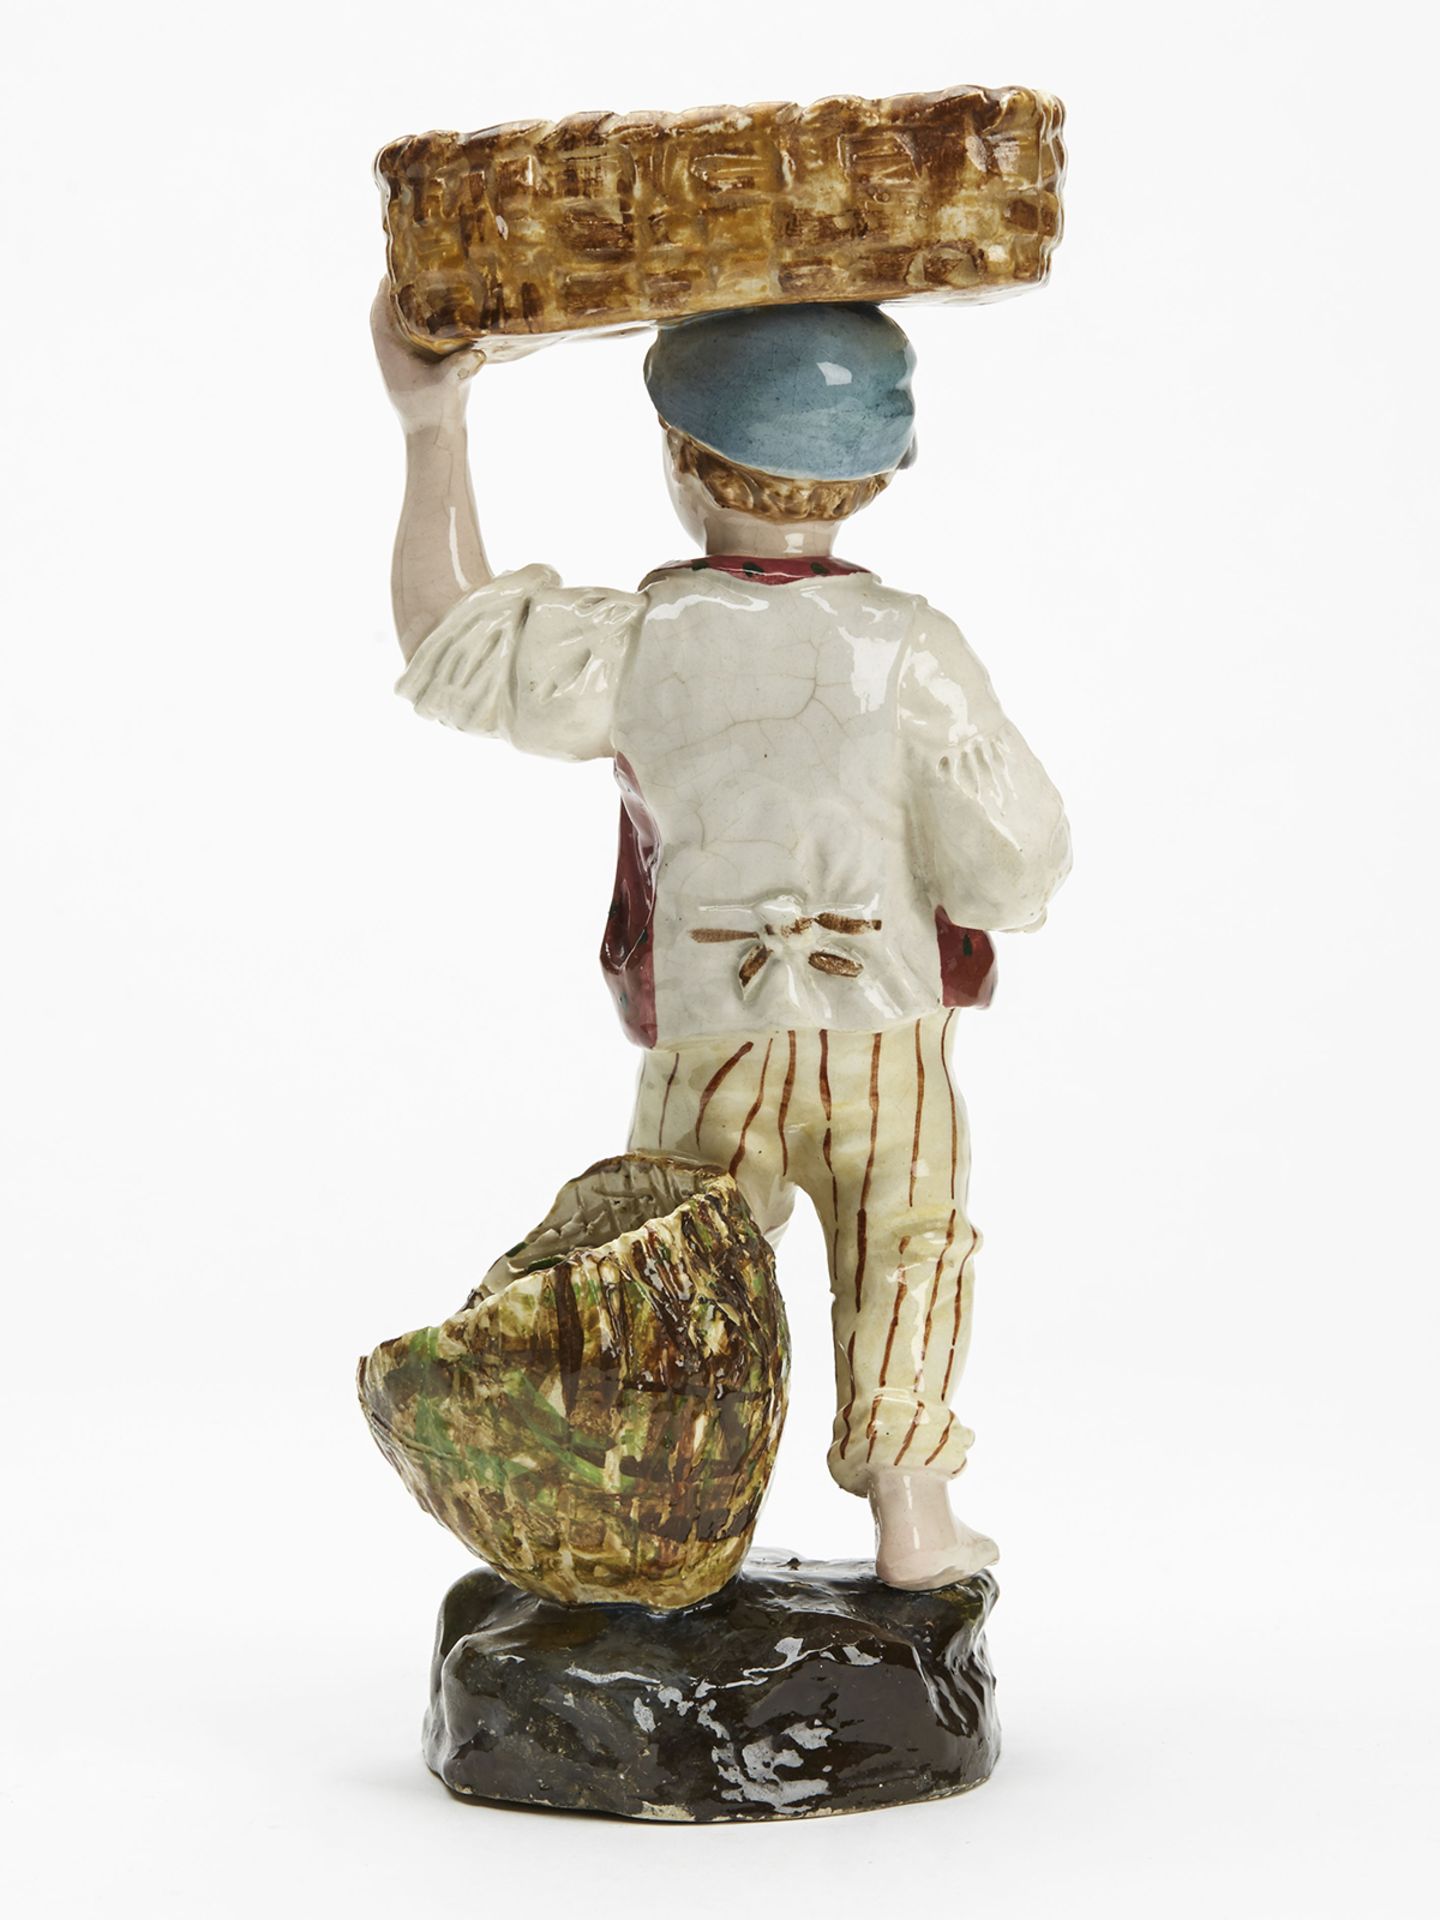 Antique Continental Pottery Boy & Baskets Figure 19Th C. - Image 3 of 8